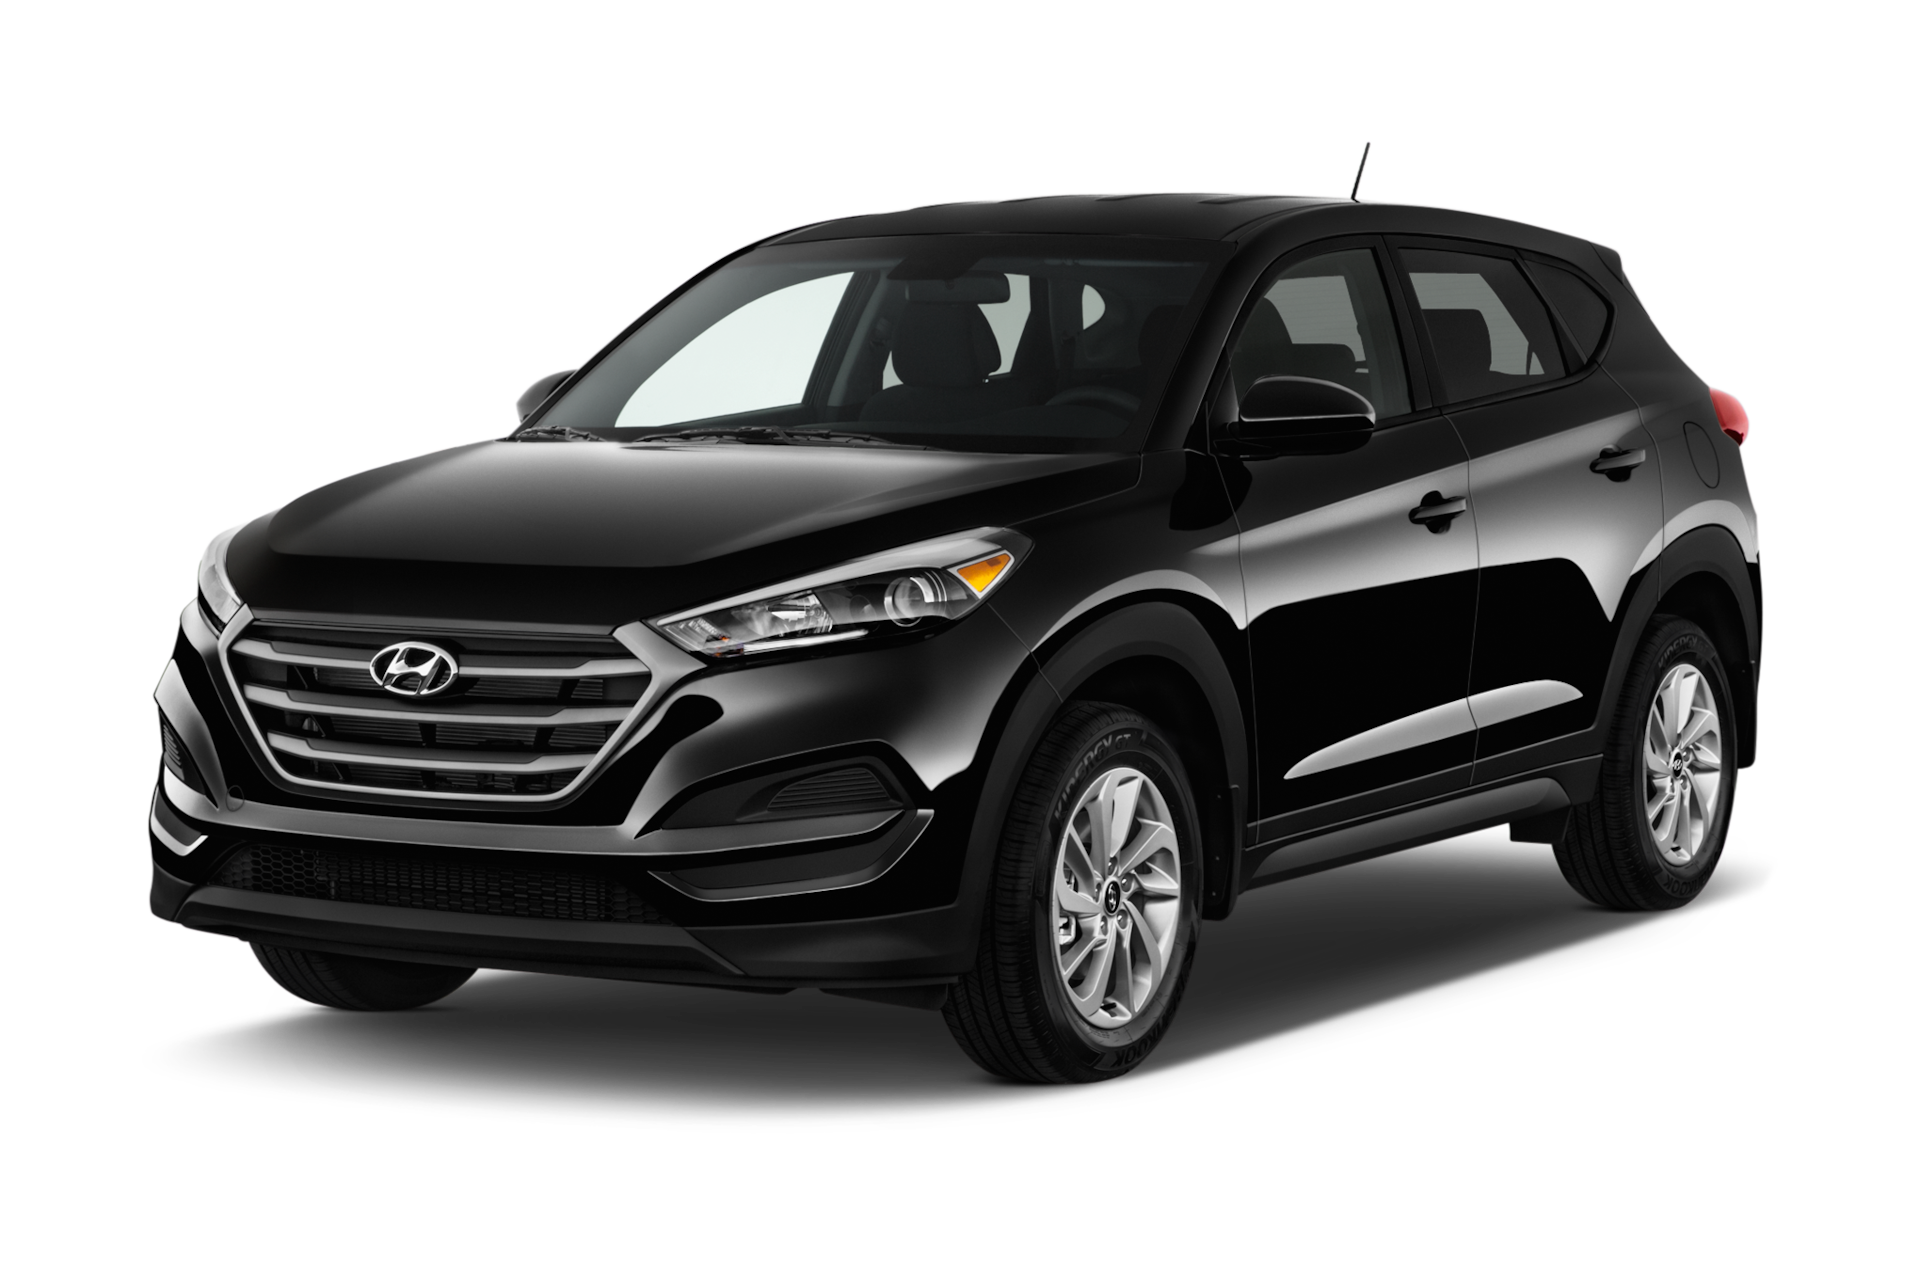 2017 Hyundai Tucson Prices, Reviews, and Photos - MotorTrend